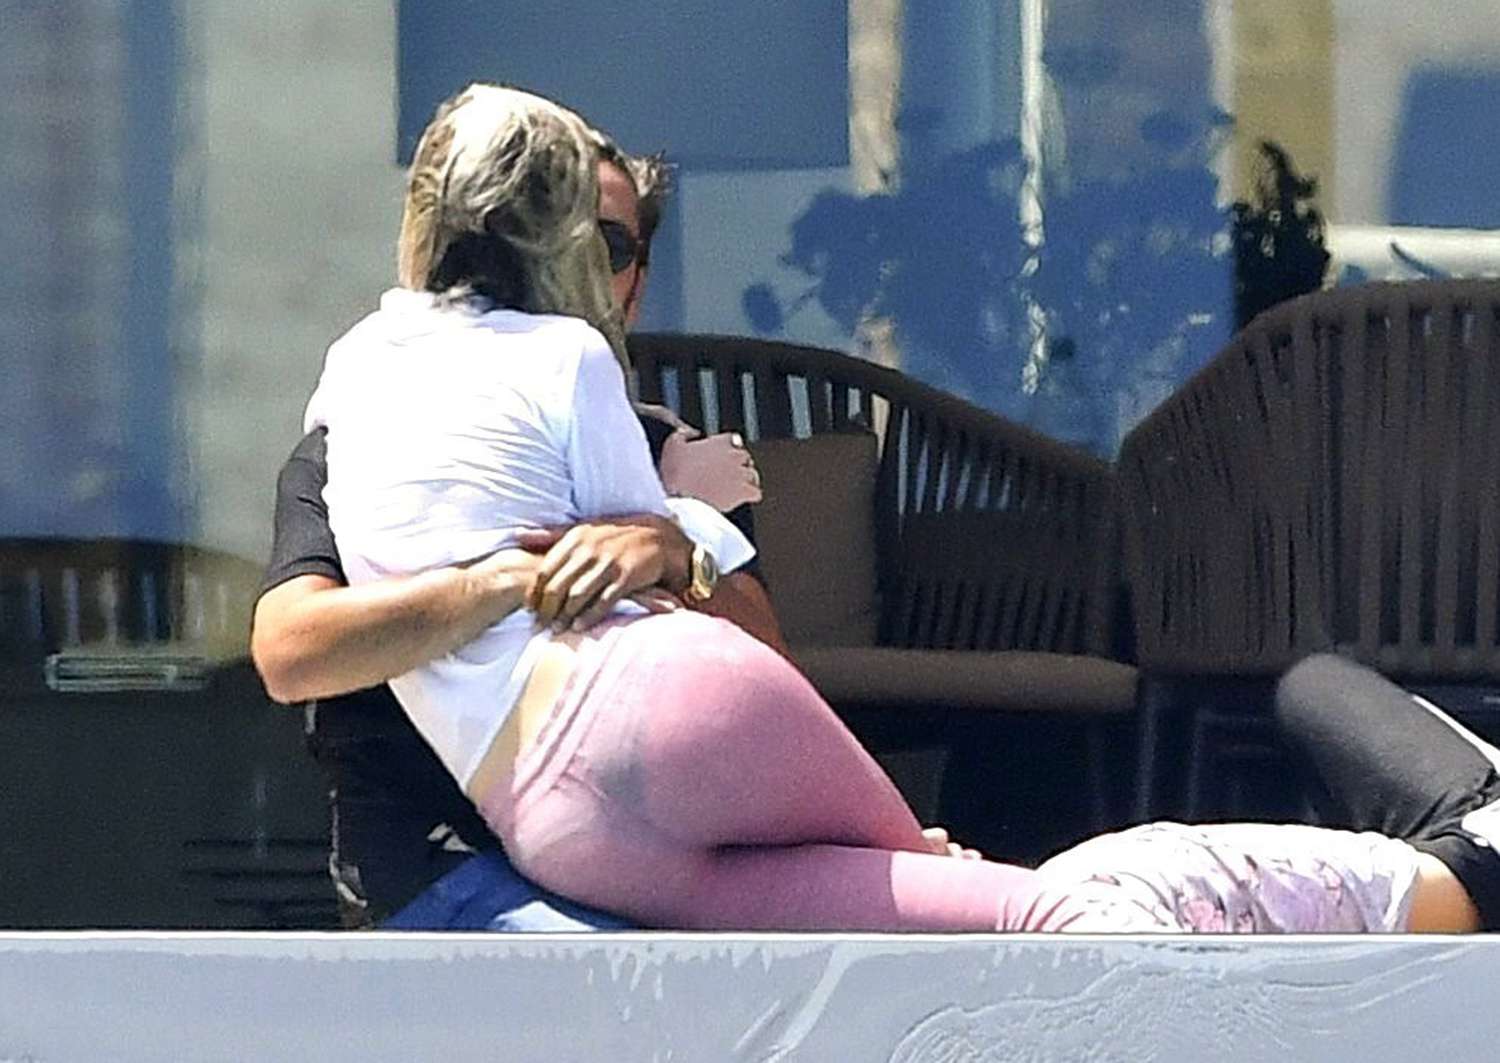 *PREMIUM-EXCLUSIVE* Bella Thorne and Scott Disick get Wet and Wild in the French Riviera